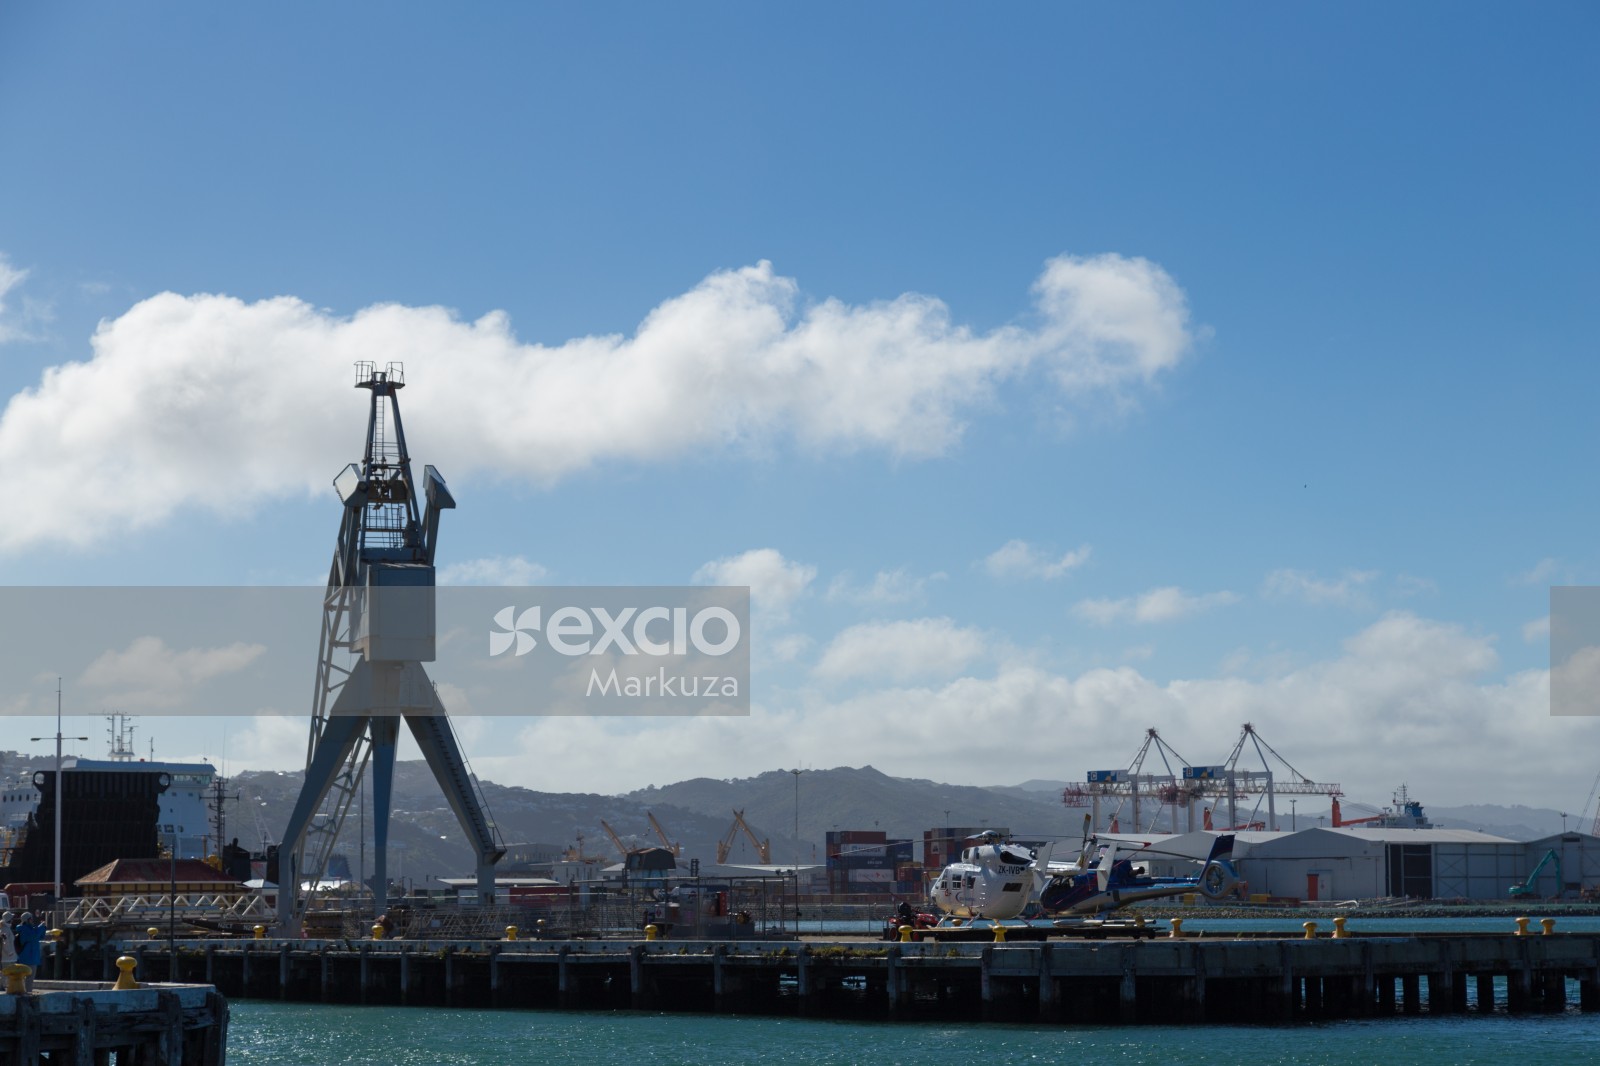 Wellington harbour cranes and helicopters